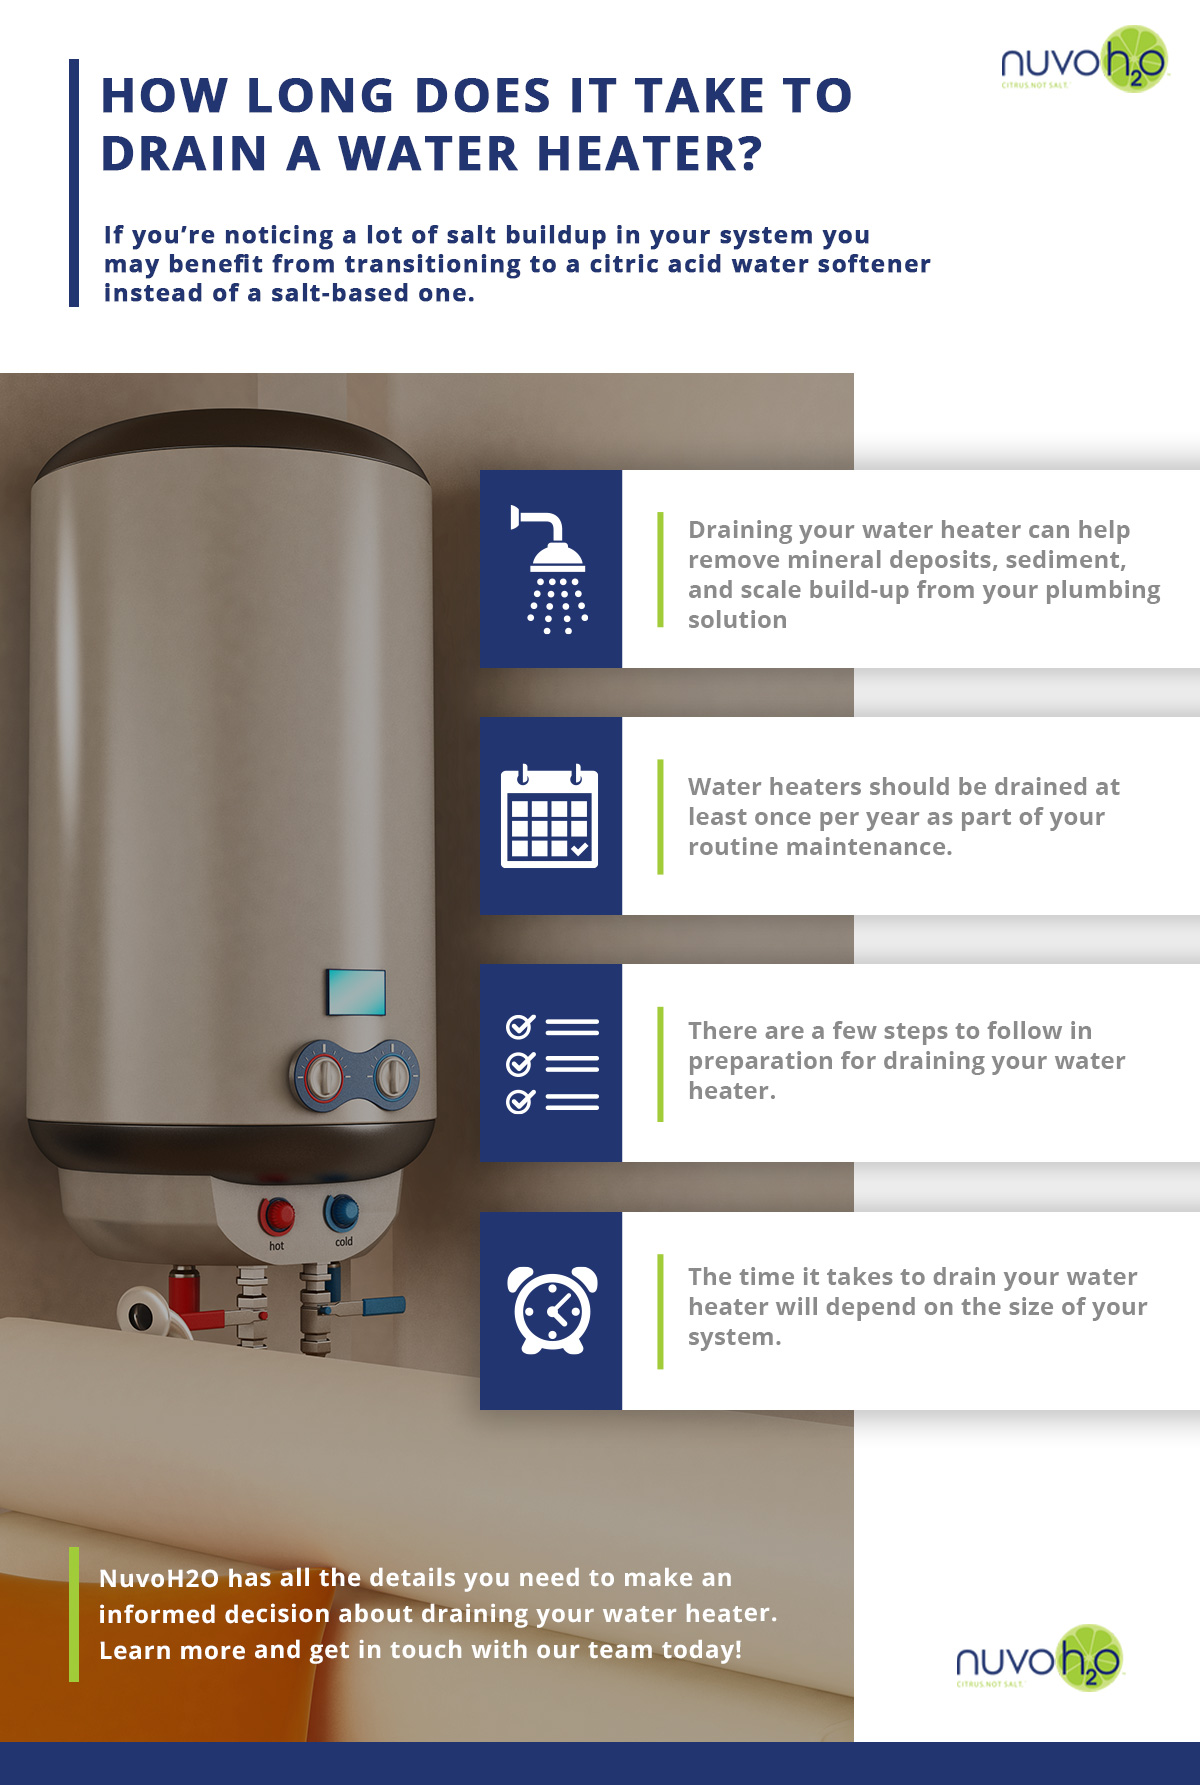 https://nuvoh2o.com/product_images/uploaded_images/how-long-does-it-take-to-drain-a-water-heater-infographic.jpg